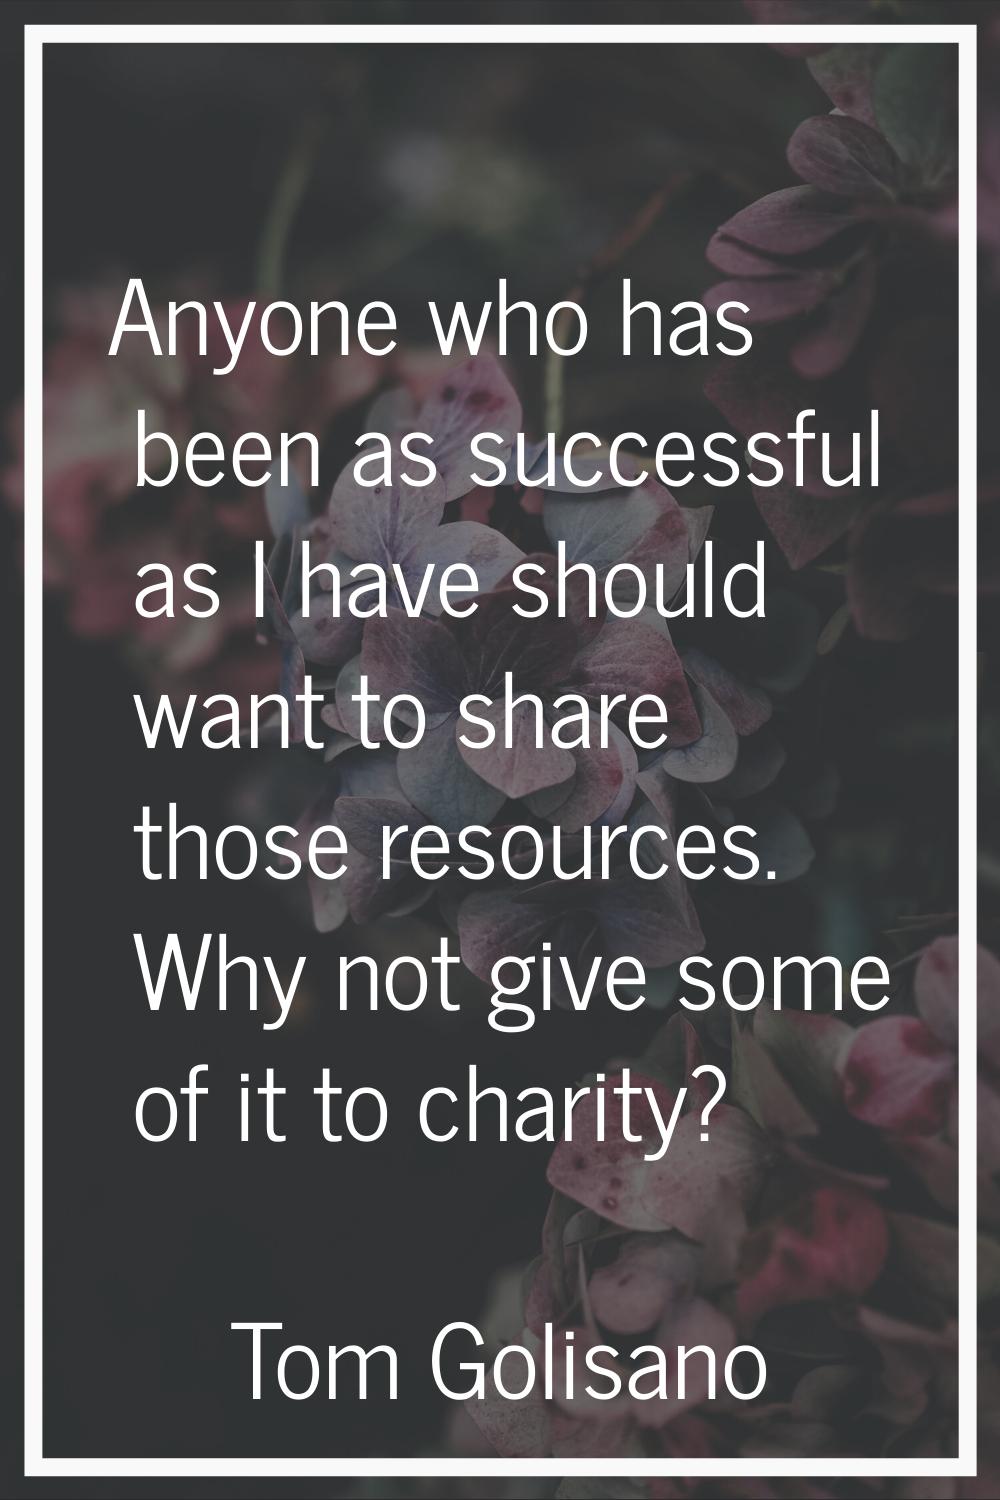 Anyone who has been as successful as I have should want to share those resources. Why not give some